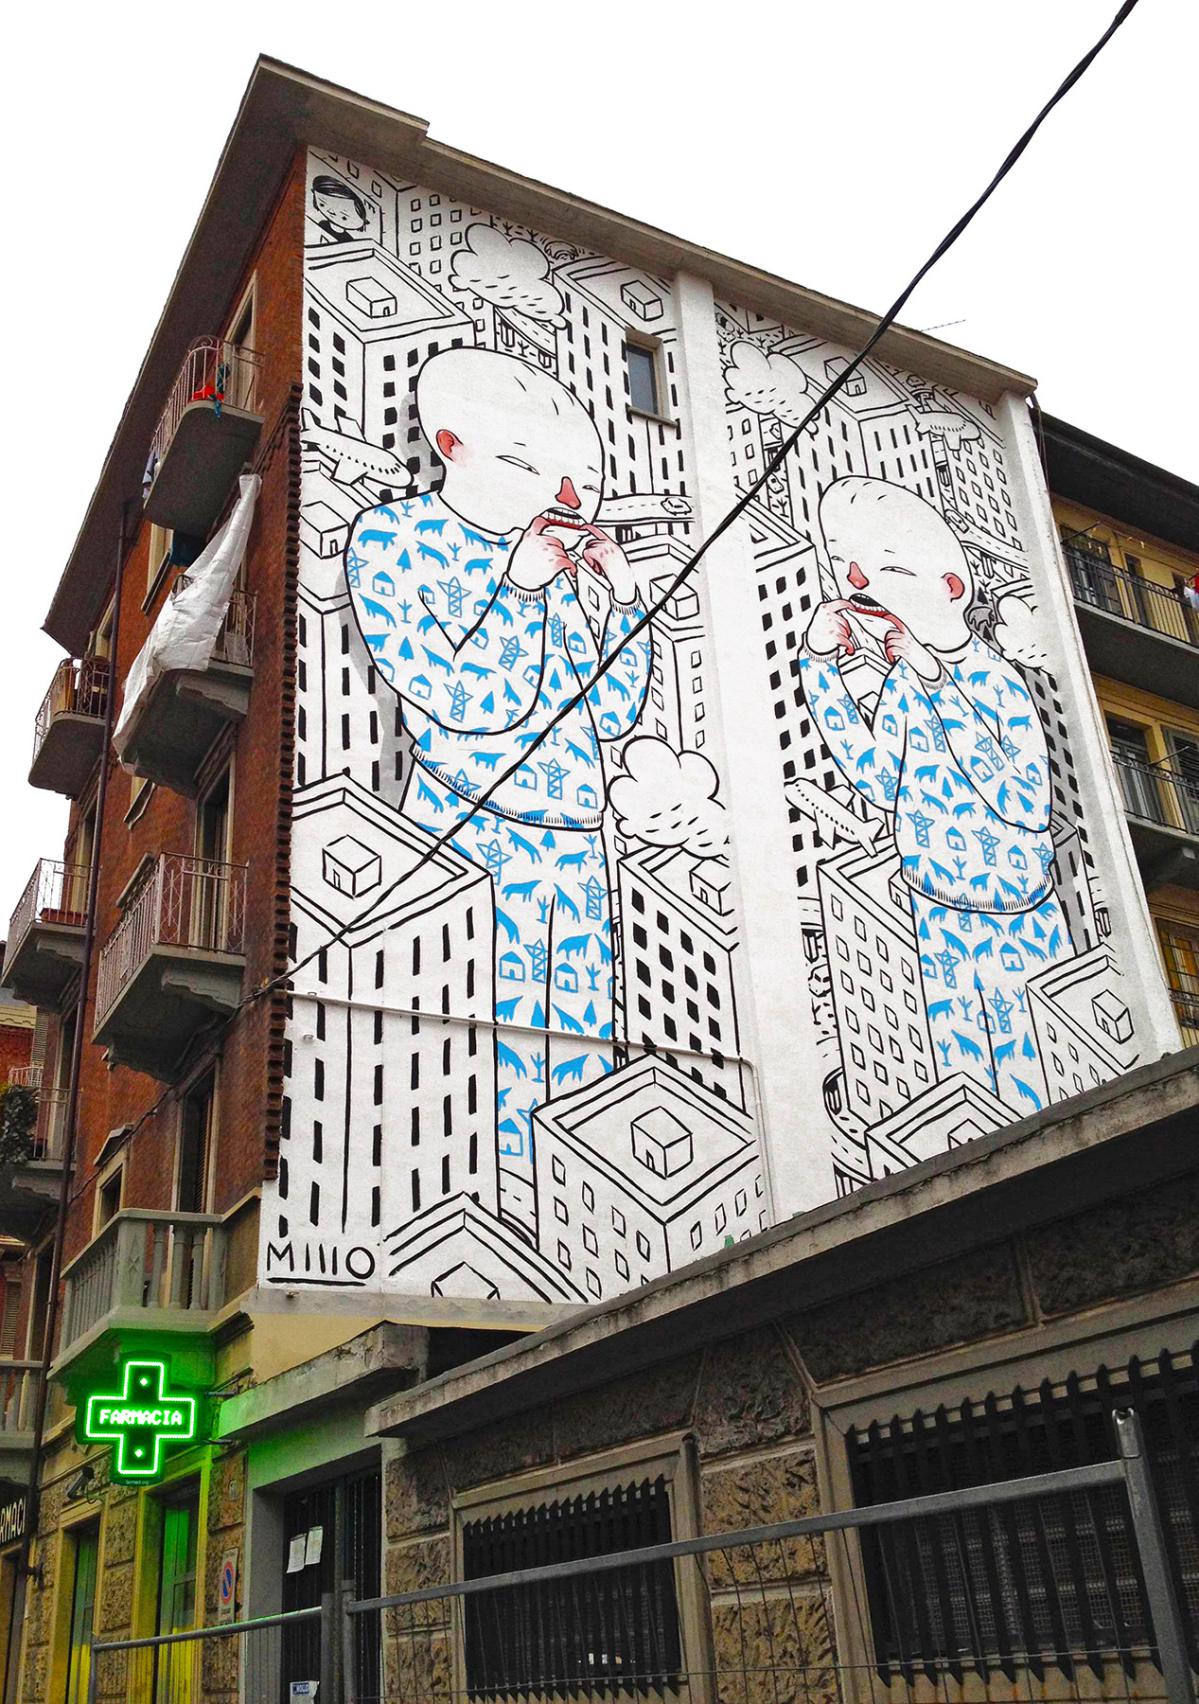 Wonderful Giant Black And White Cartoon Murals By Millo 15